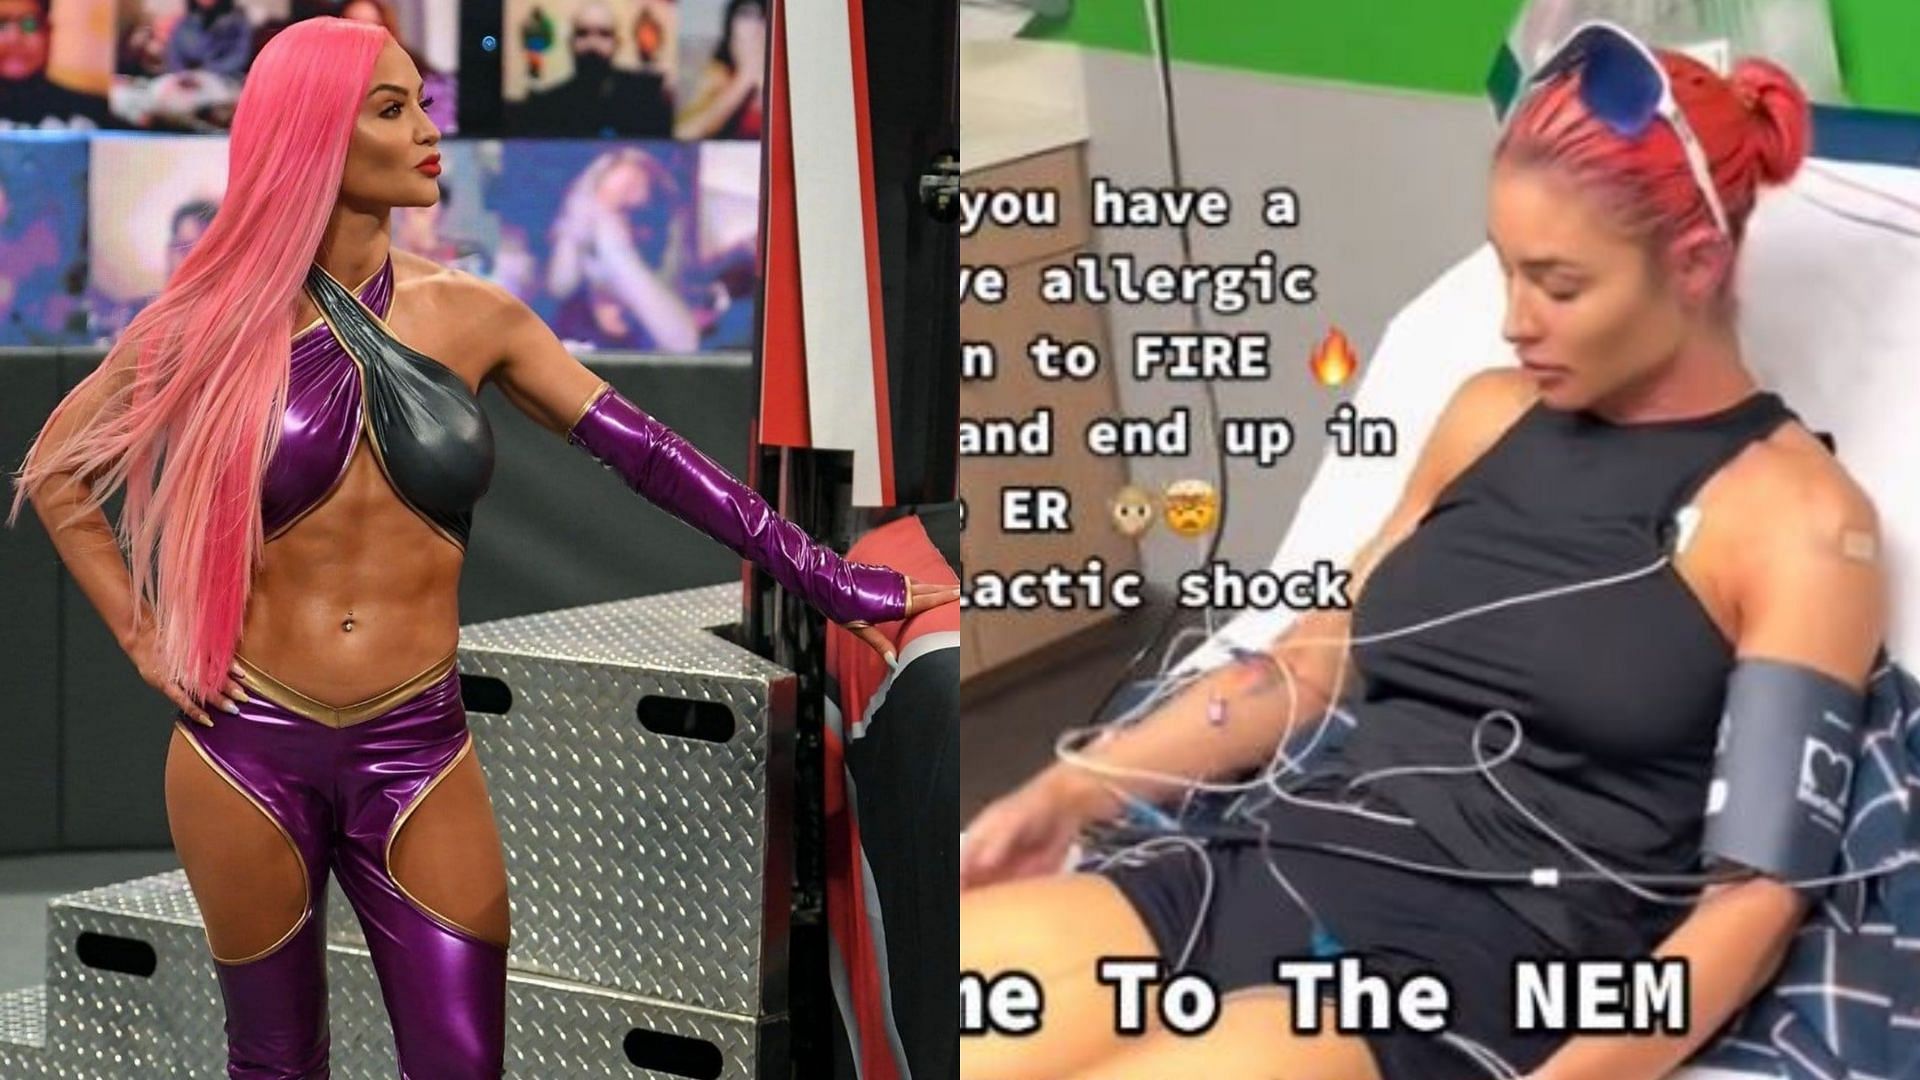 Eva Marie had to rush to the ER due to a bad allergic reaction